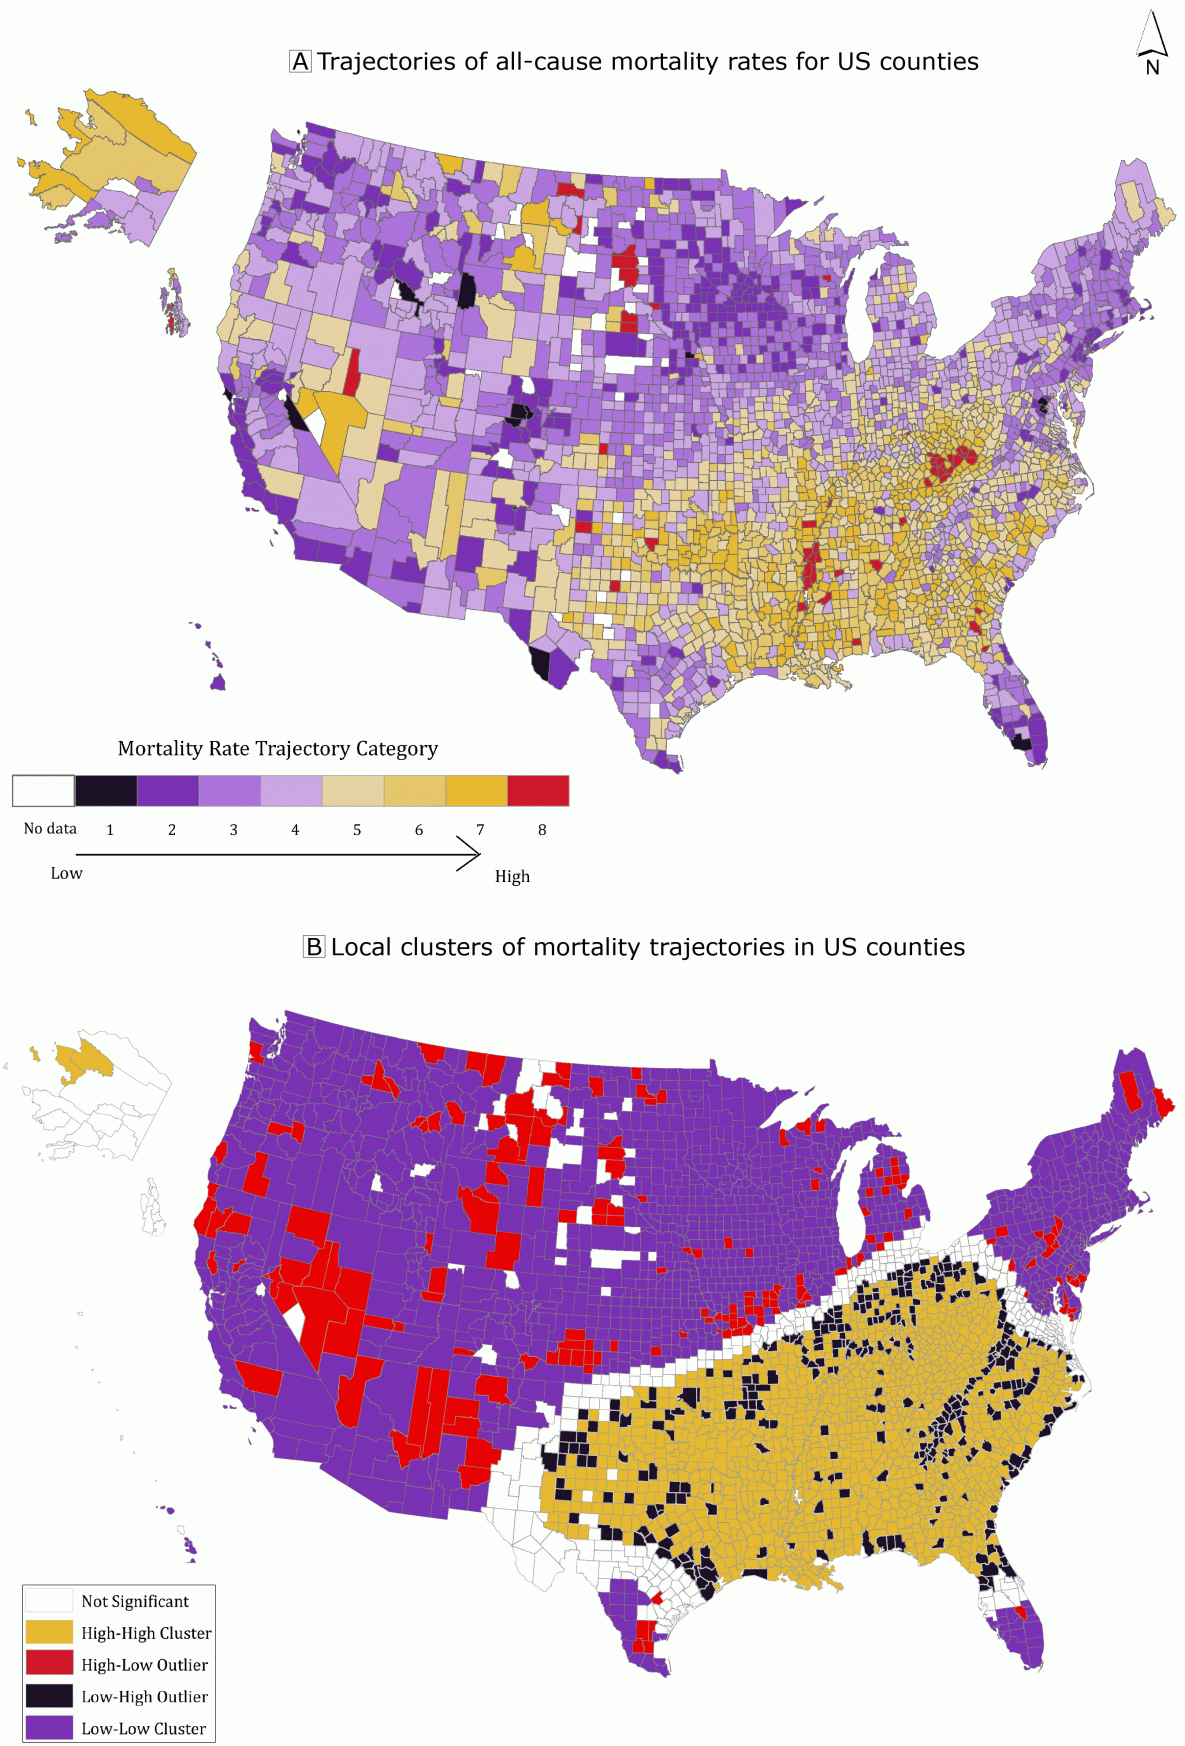 Trajectories of age-adjusted all-cause mortality in US counties using group-based trajectory models, 1999–2016. The outcome measure used to generate rate trajectories was the yearly, age-adjusted, all-cause mortality rate of the county. Panel A: Trajectories of all-cause mortality rates for US counties. Panel B: Local clusters of mortality trajectories in US counties detected by using local indicators of spatial association (LISA). The 4 categories of significant spatial clusters (P  < .05): 1) high–high clusters representing all counties with high mortality, the worst trajectory group; 2) high–low outliers representing counties in the worst trajectory groups near counties in the most favorable trajectory groups (at-risk counties doing worse than those around them); 3) low–high outliers representing counties in the best trajectory groups near counties in the worst trajectory groups (resilient counties doing better than those around them); and 4) low–low clusters of counties in the most favorable trajectory groups. Source: 1999–2016 Compressed Mortality File, Centers for Disease Control and Prevention (14).